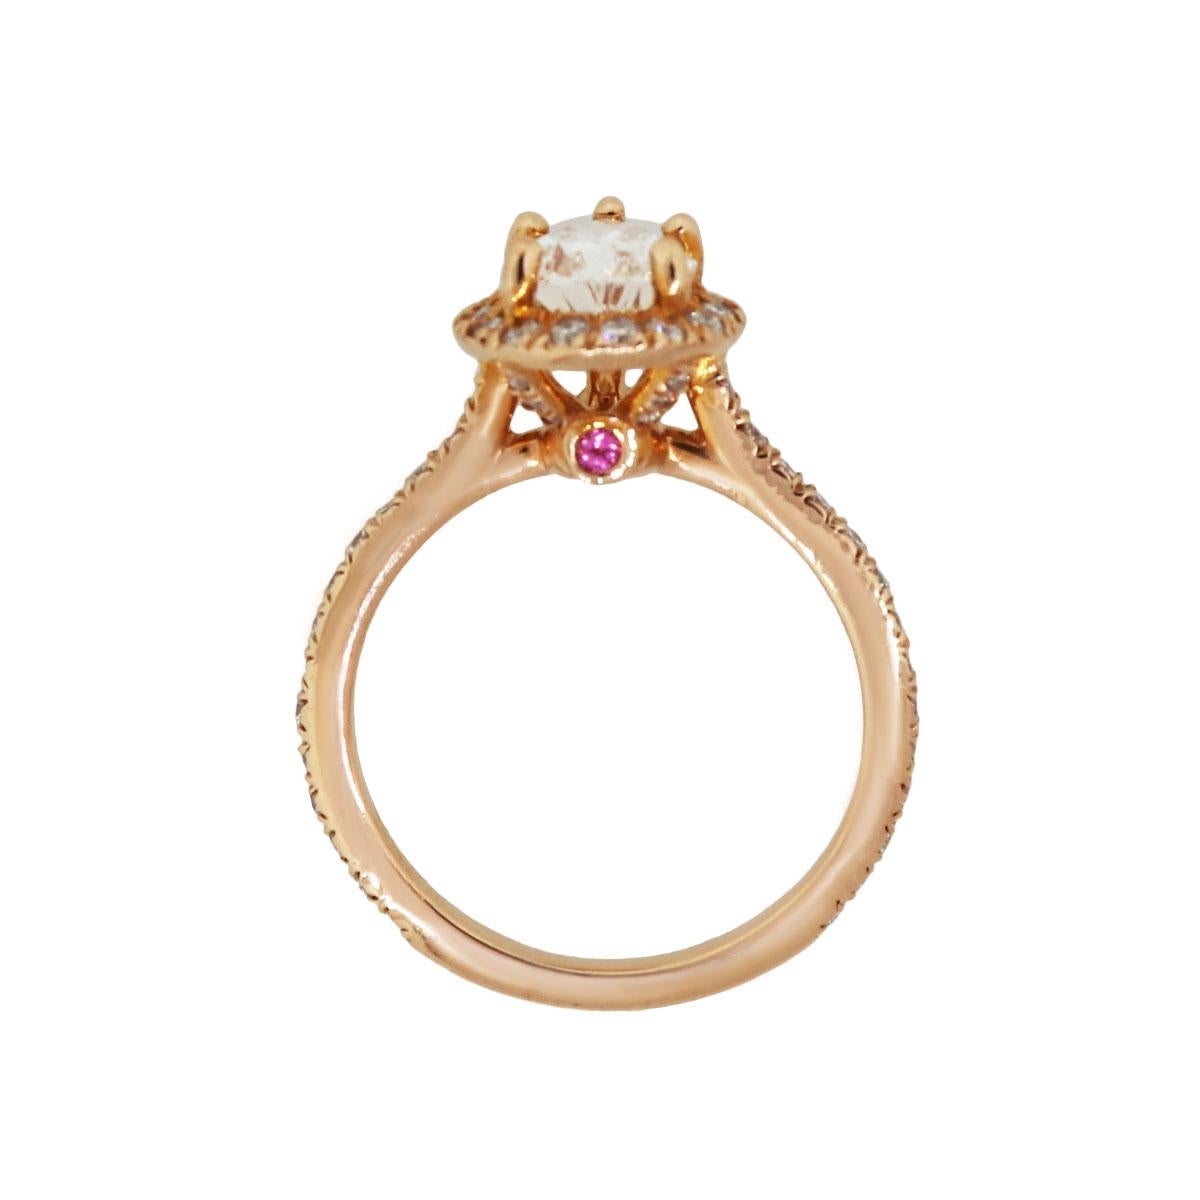 Material: 14k rose gold
Center Diamond Details: GIA certified 1.31ct pear shape diamond. Diamond is G in color and VVS1 in clarity. GIA cert. #2237572429
Adjacent Diamond Details: Approximately 0.58ctw of round brilliant diamonds. Diamonds are G/H